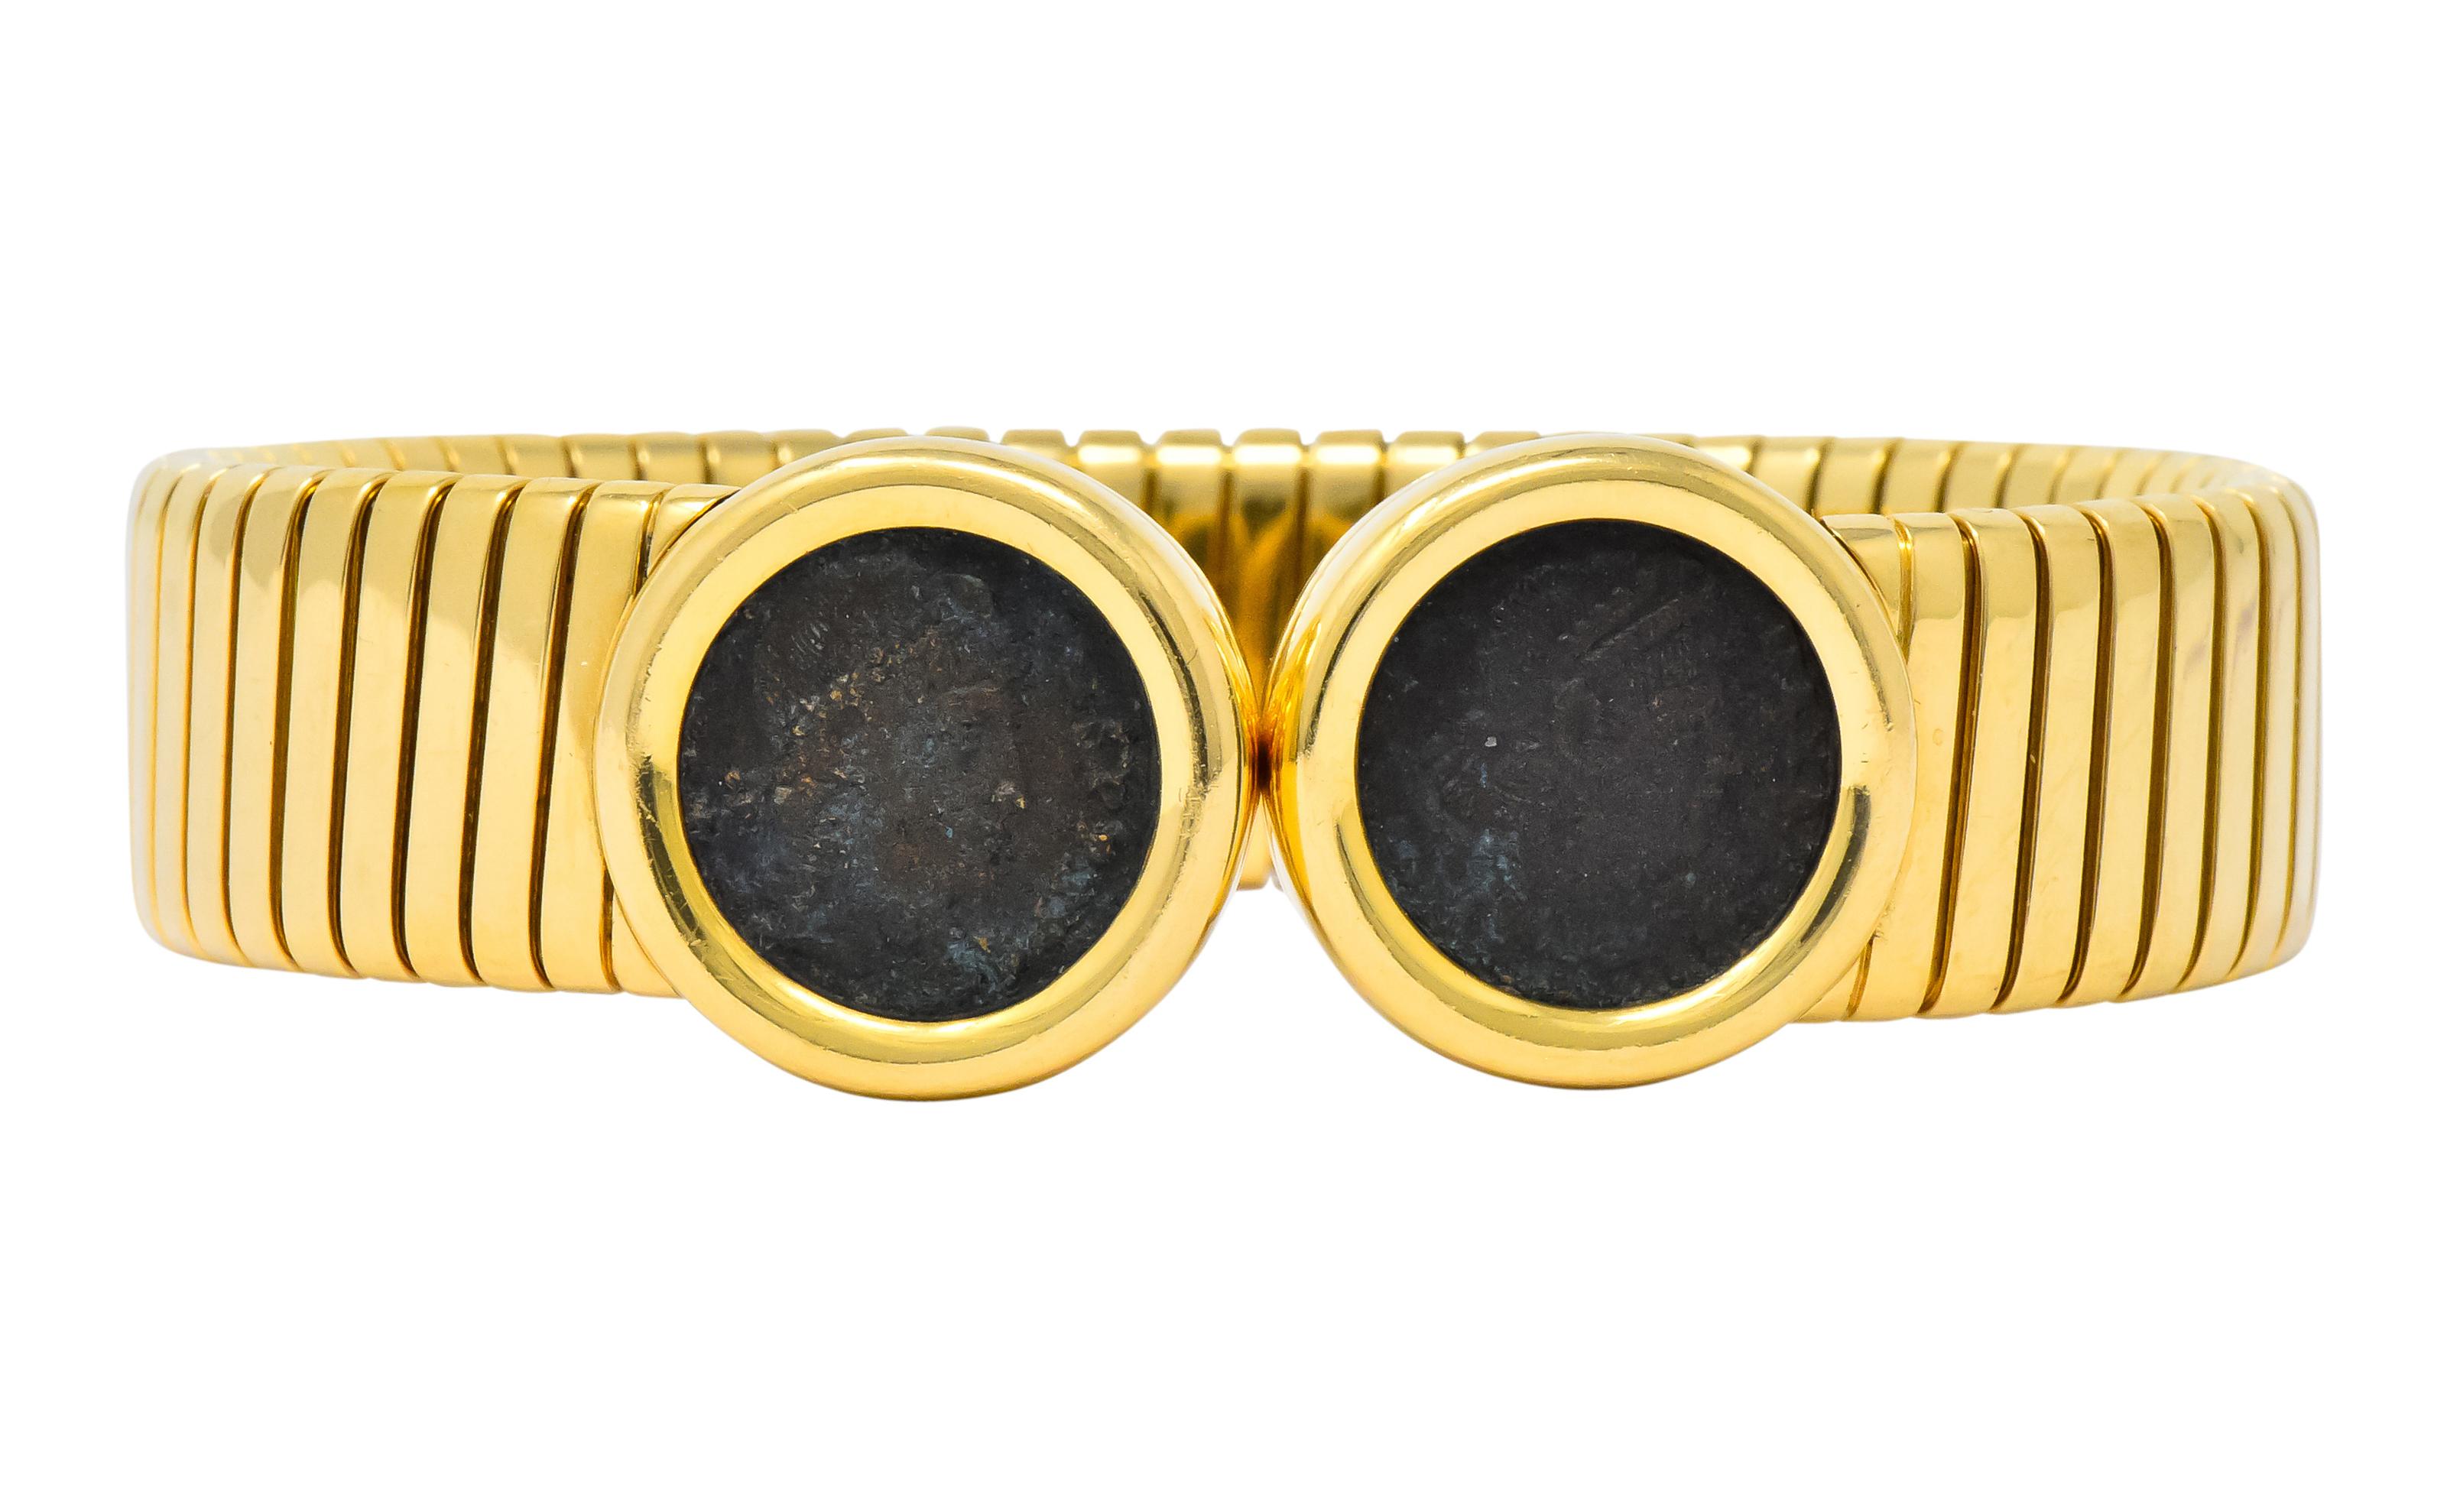 Flexible tubogas style bangle

With bezel set ancient coin terminals

Coins depict the profile of Emperor Constans of Rome

Inscribed on coin bezel verso 'Roma Constans I AVG A.D. 337-350'

From the Monete collection 

Fully signed Bulgari with